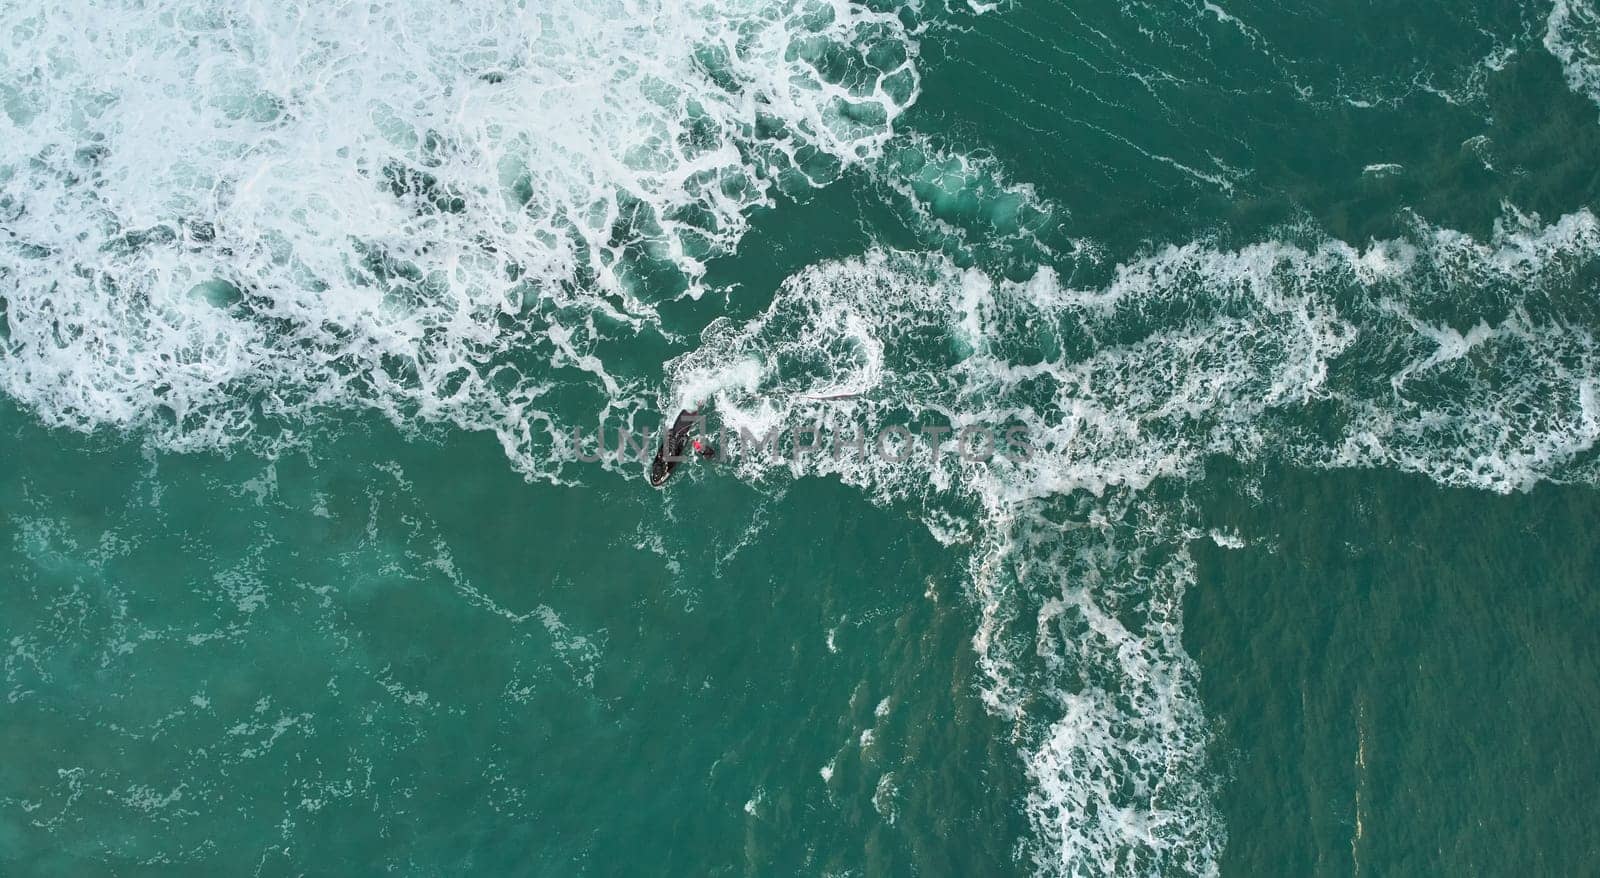 An aerial perspective captures a surfer effortlessly riding a powerful wave on the ocean, showcasing a harmonious interaction between water and human recreation